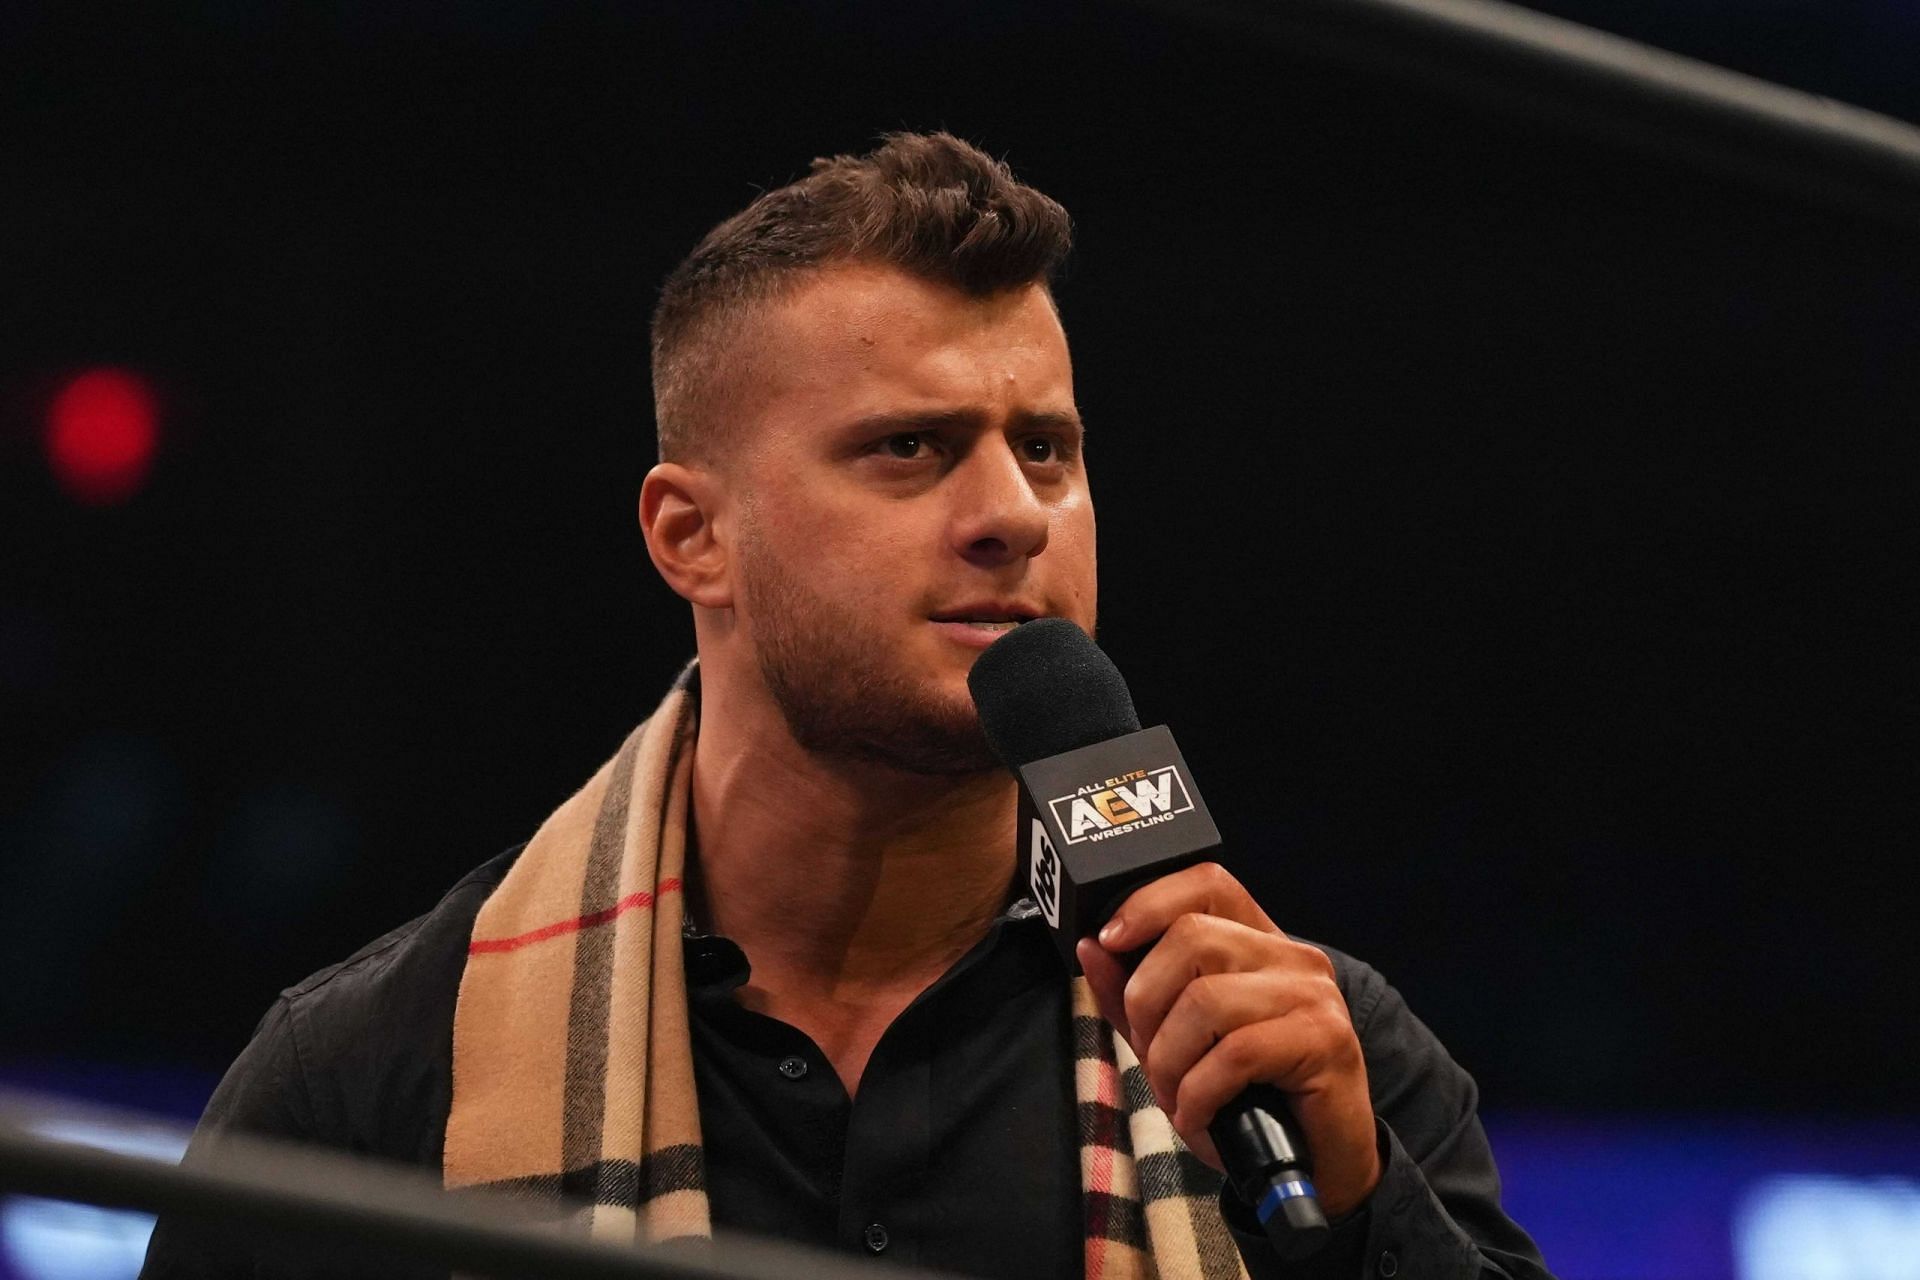 MJF has been put on notice by an NJPW star